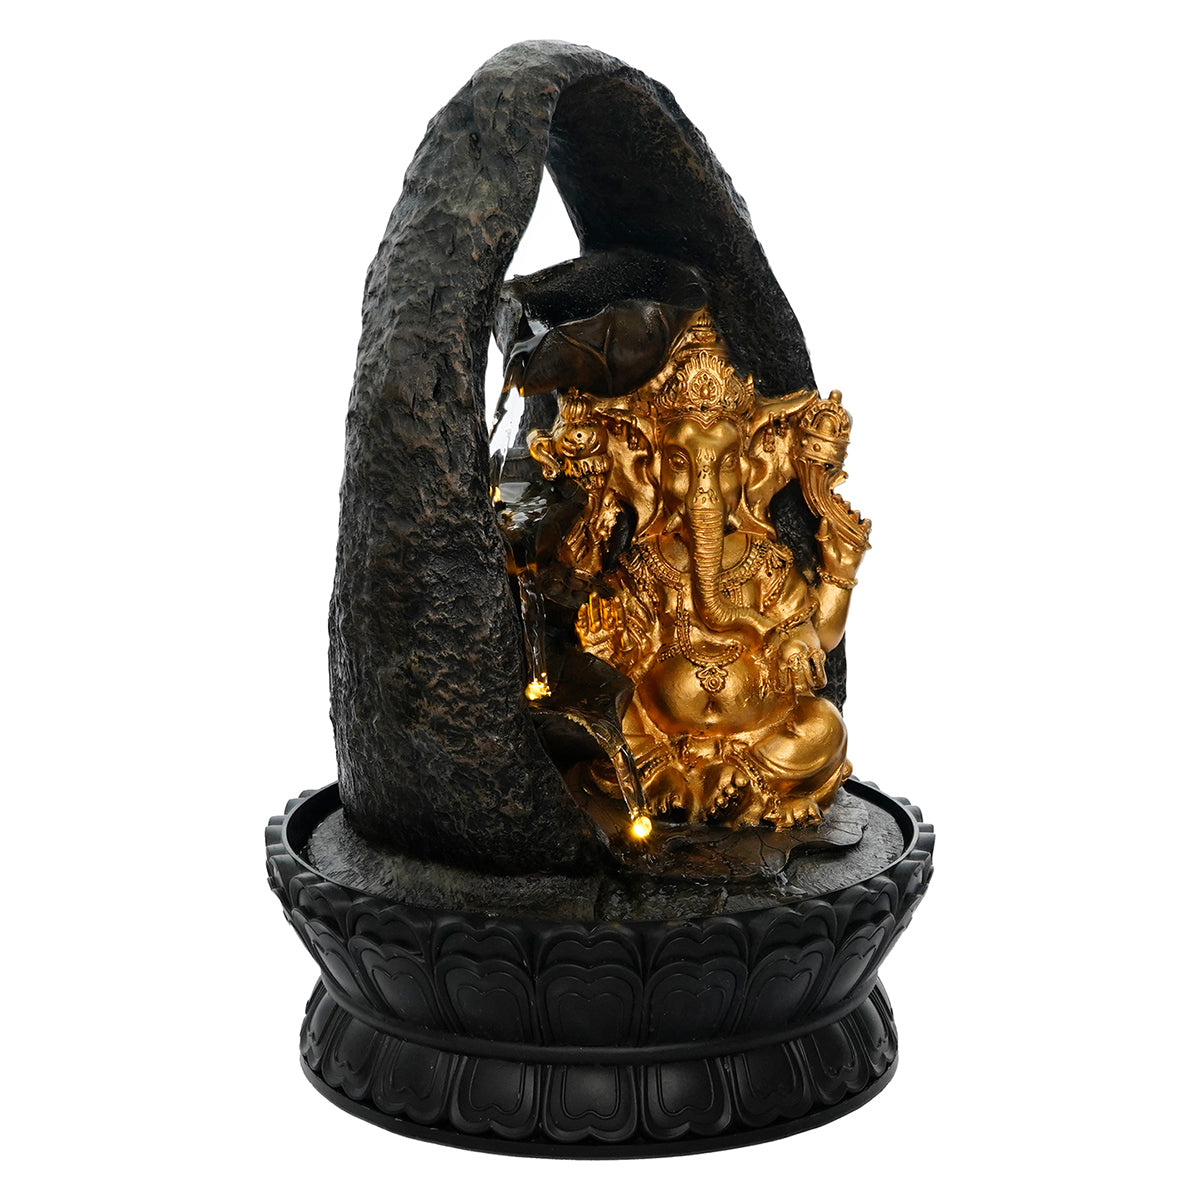 Polystone Black and Golden Decorative Lord Ganesha Idol Water Fountain With Light For Home/Office Décor 3